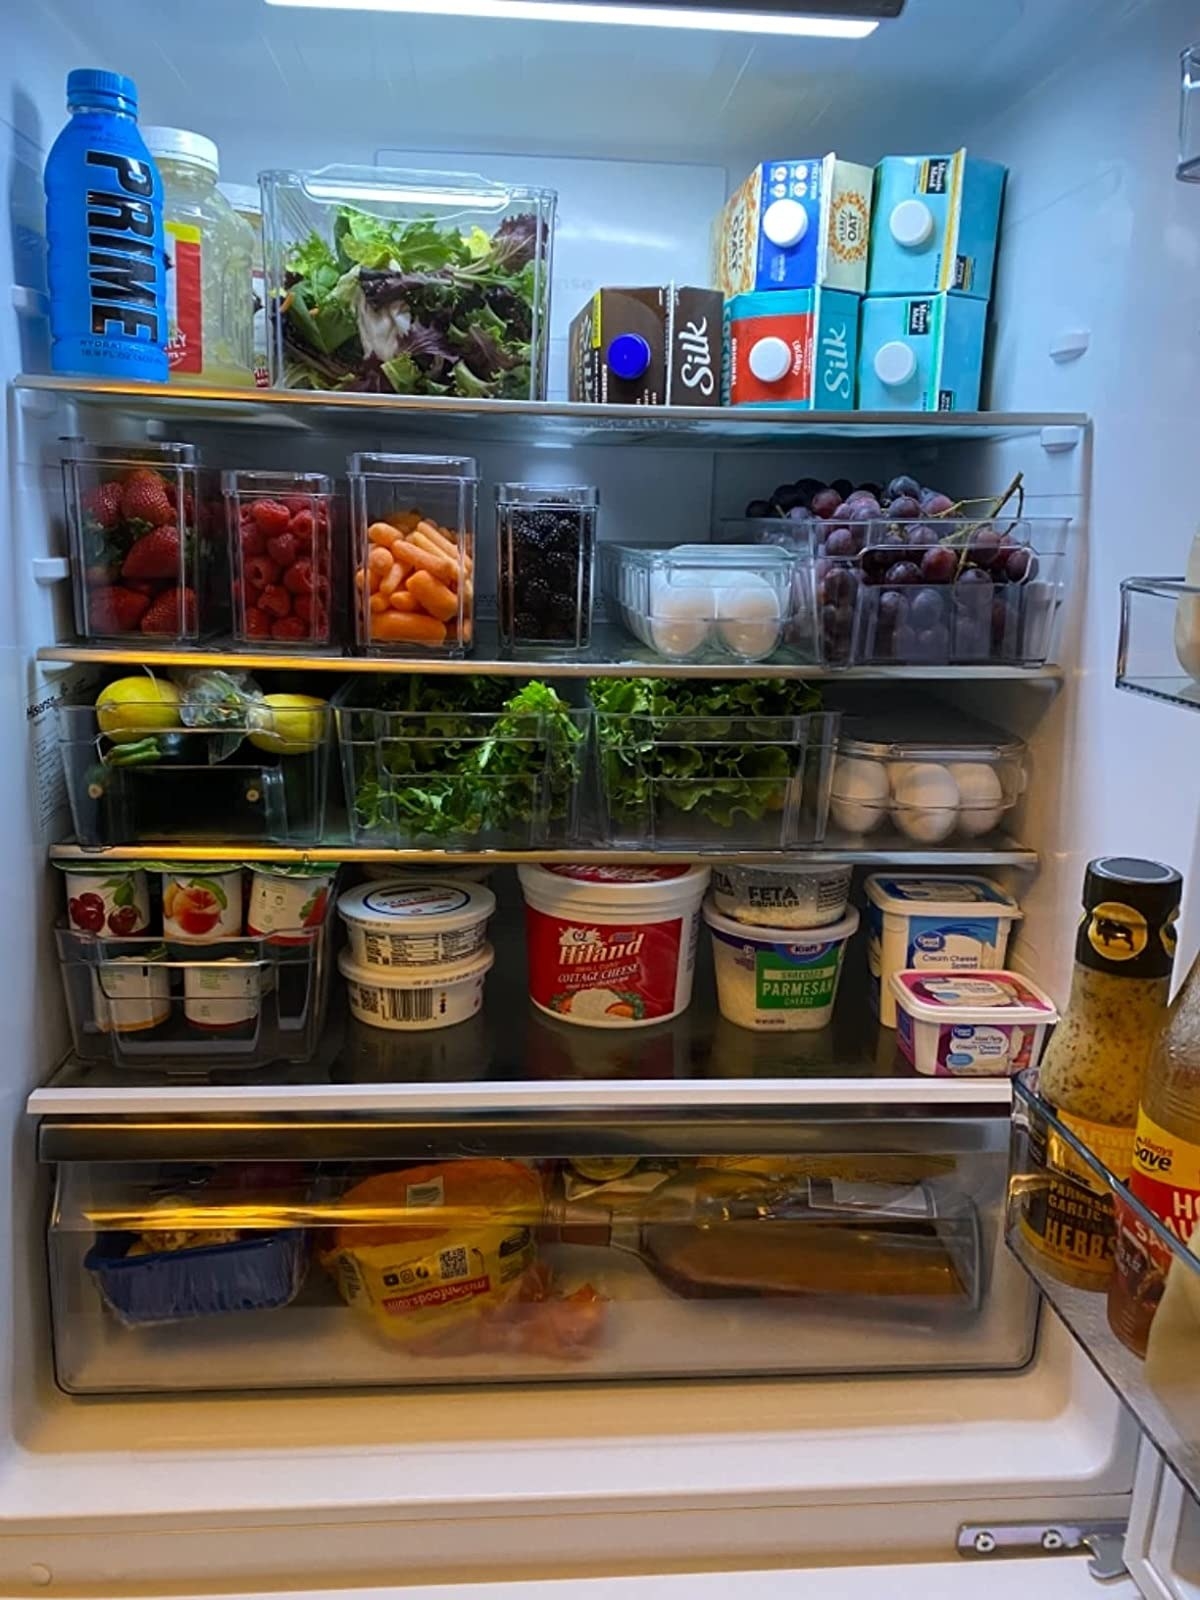 Reviewer image of organizers used to store food in a fridge